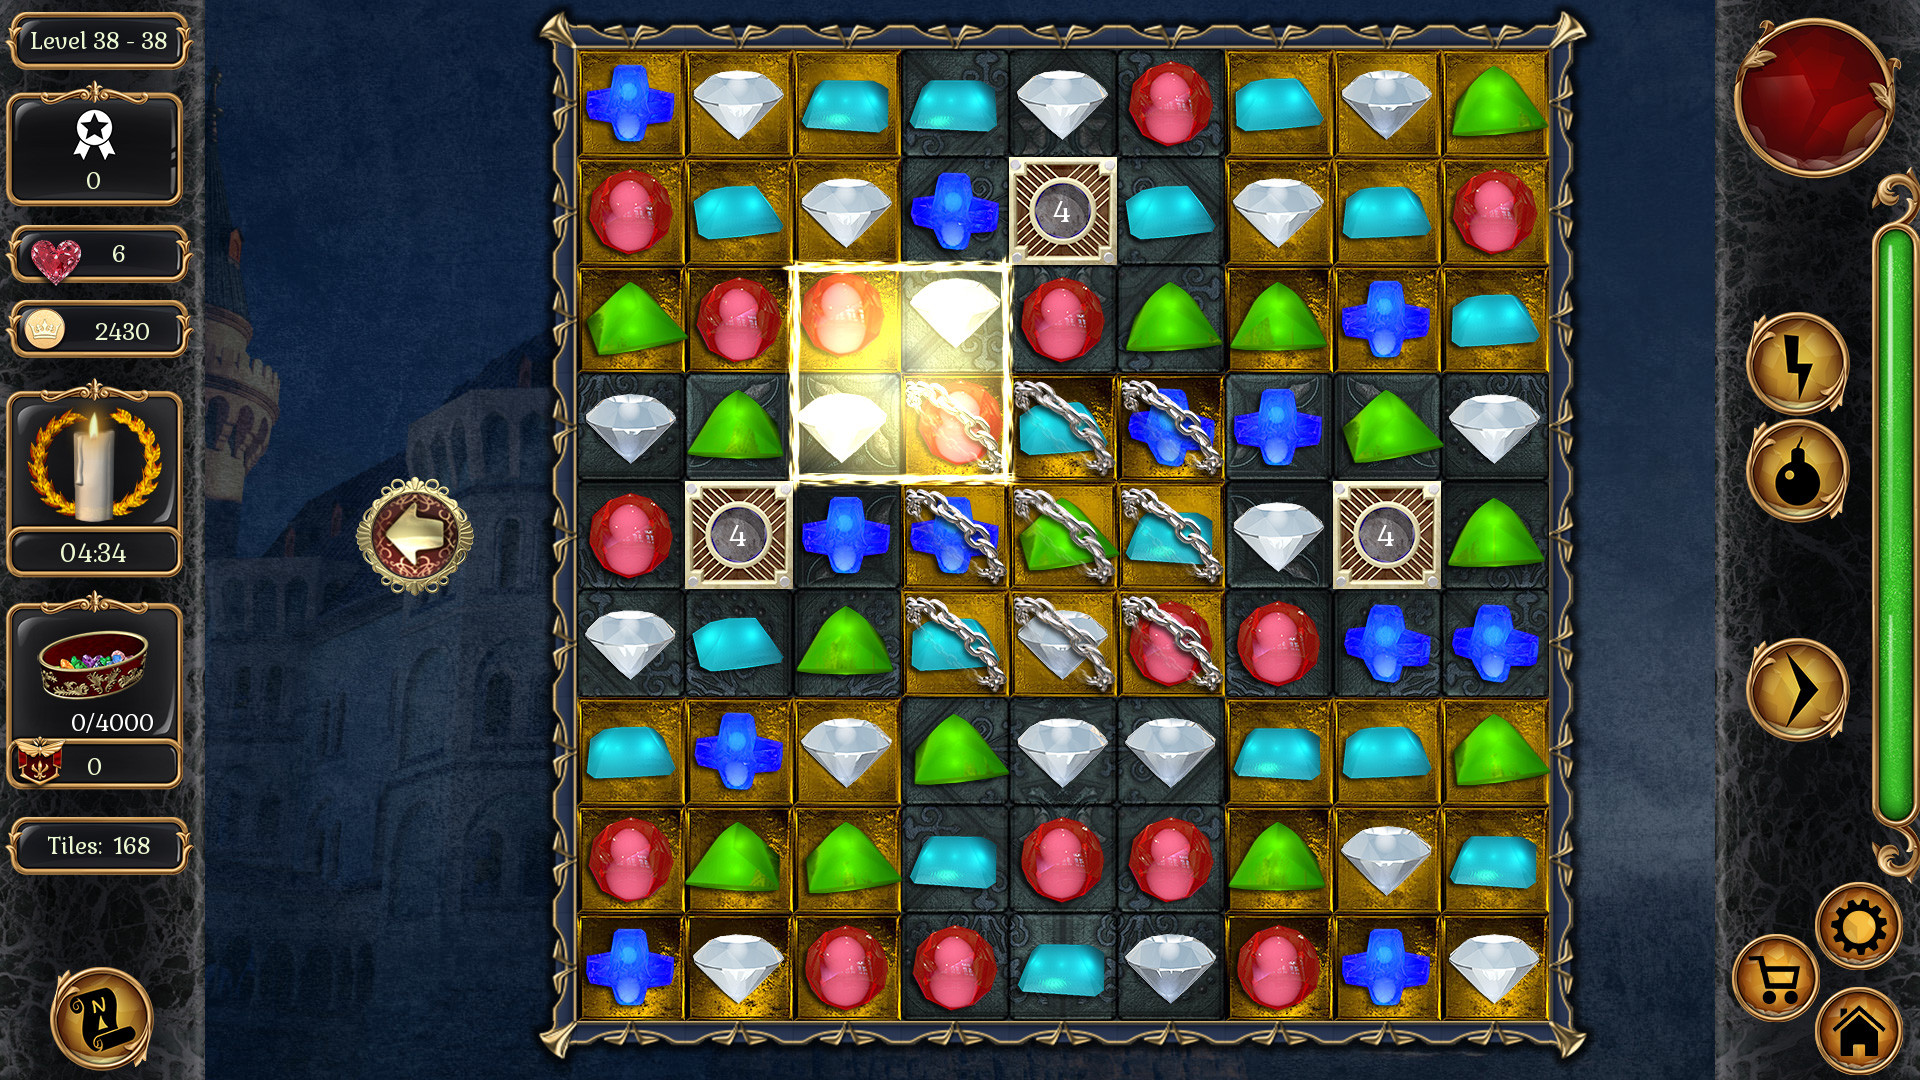 Jewel Match 2 - Play Game for Free - GameTop